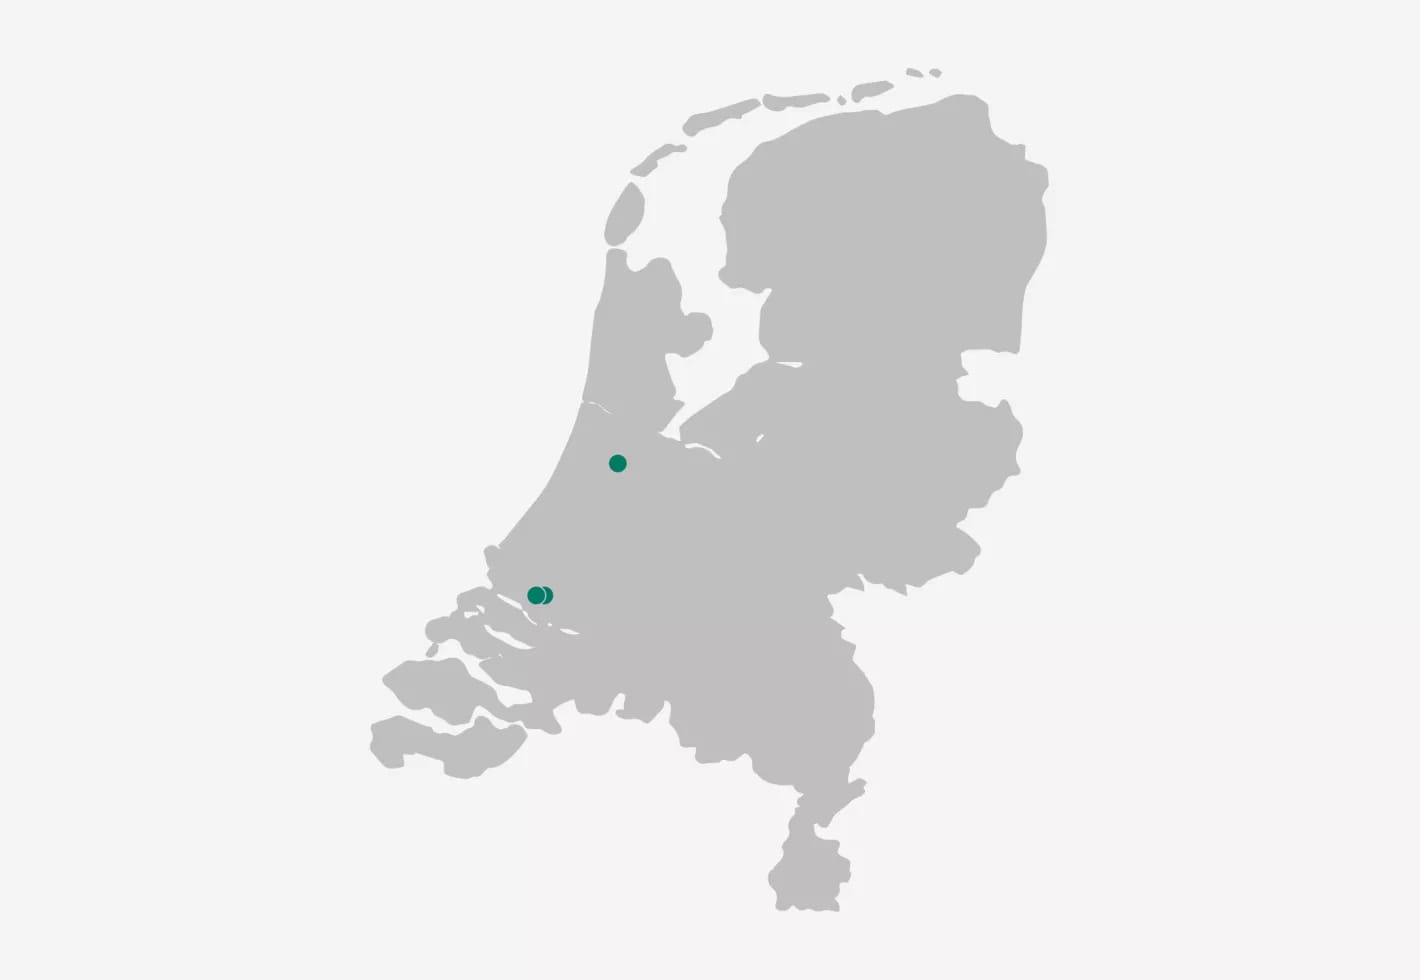 Our presence in The Netherlands